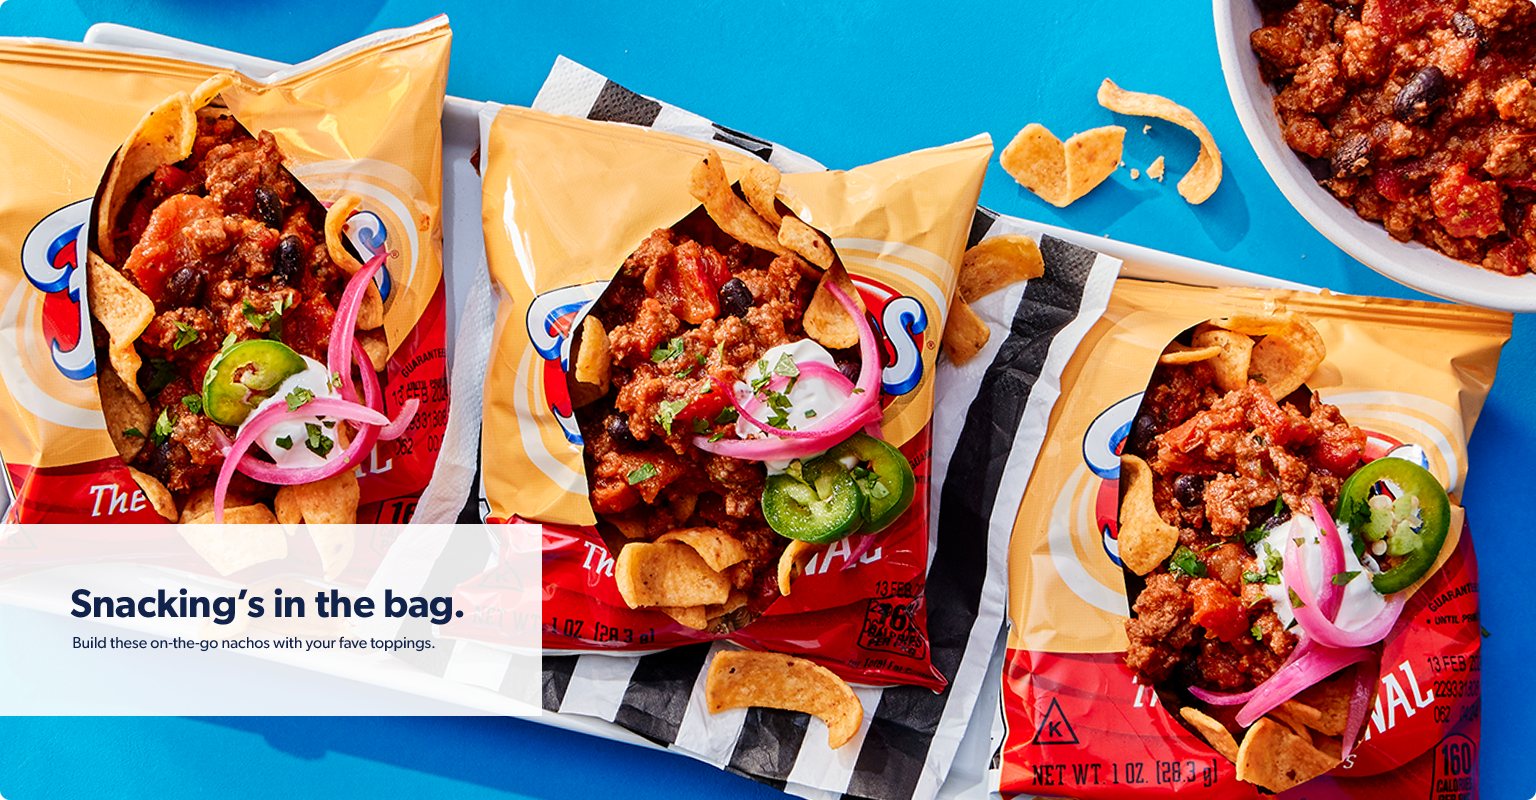 Snacking’s in the bag when you build on the go nachos with your favorite toppings.